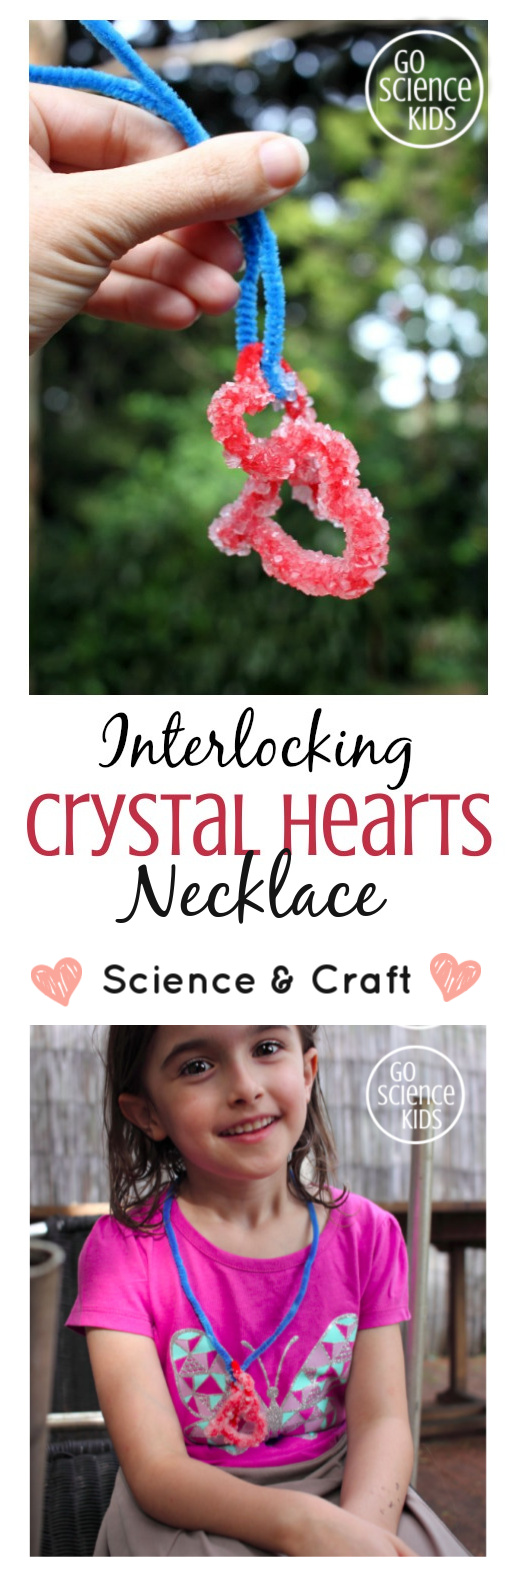 Interlocking crystal hearts - science and craft STEM or STEAM project for kids